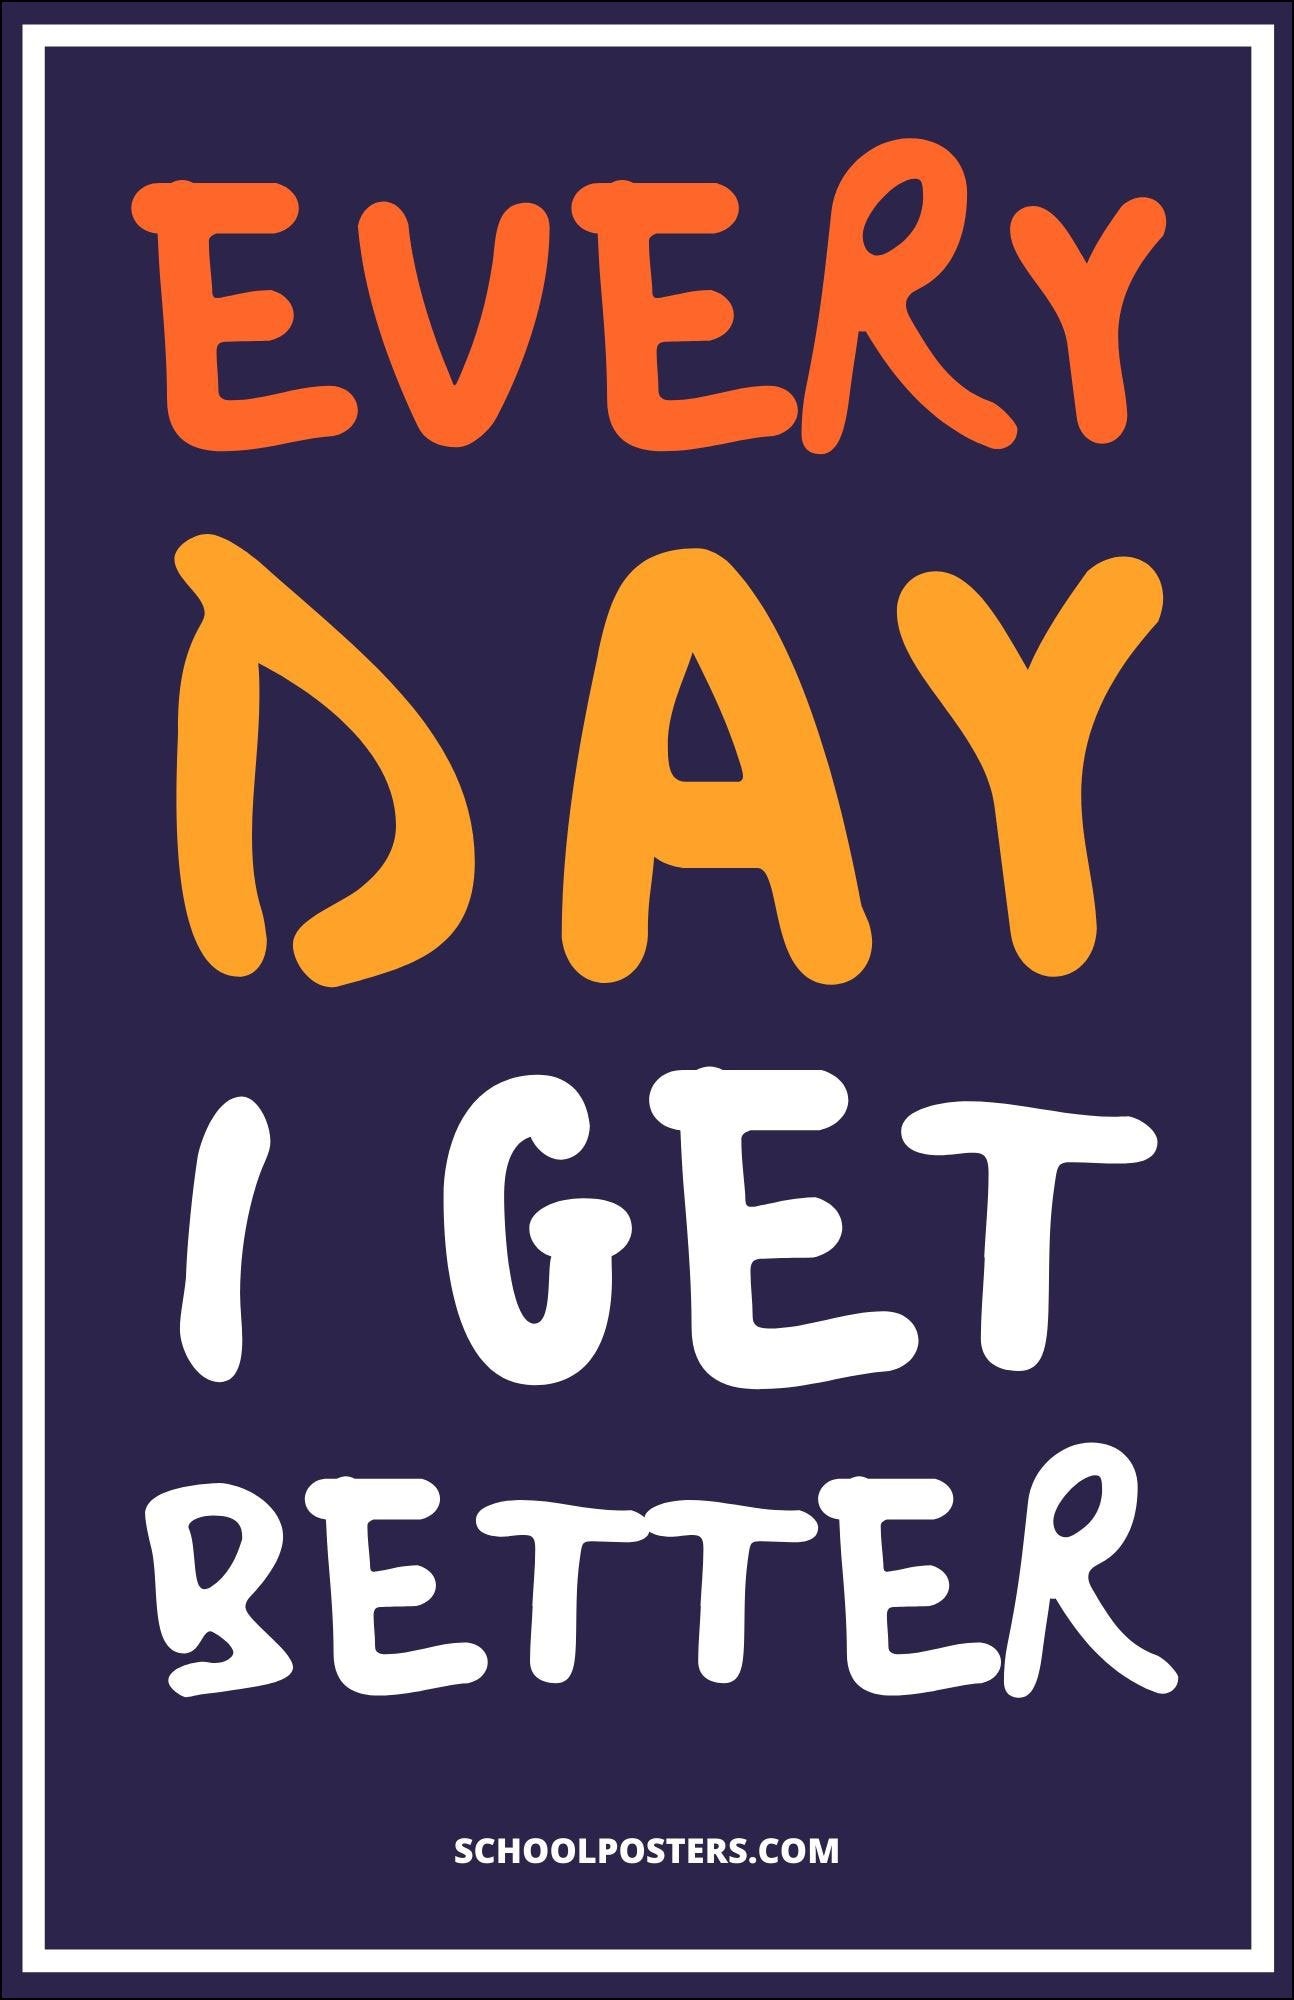 Every Day I Get Better Poster